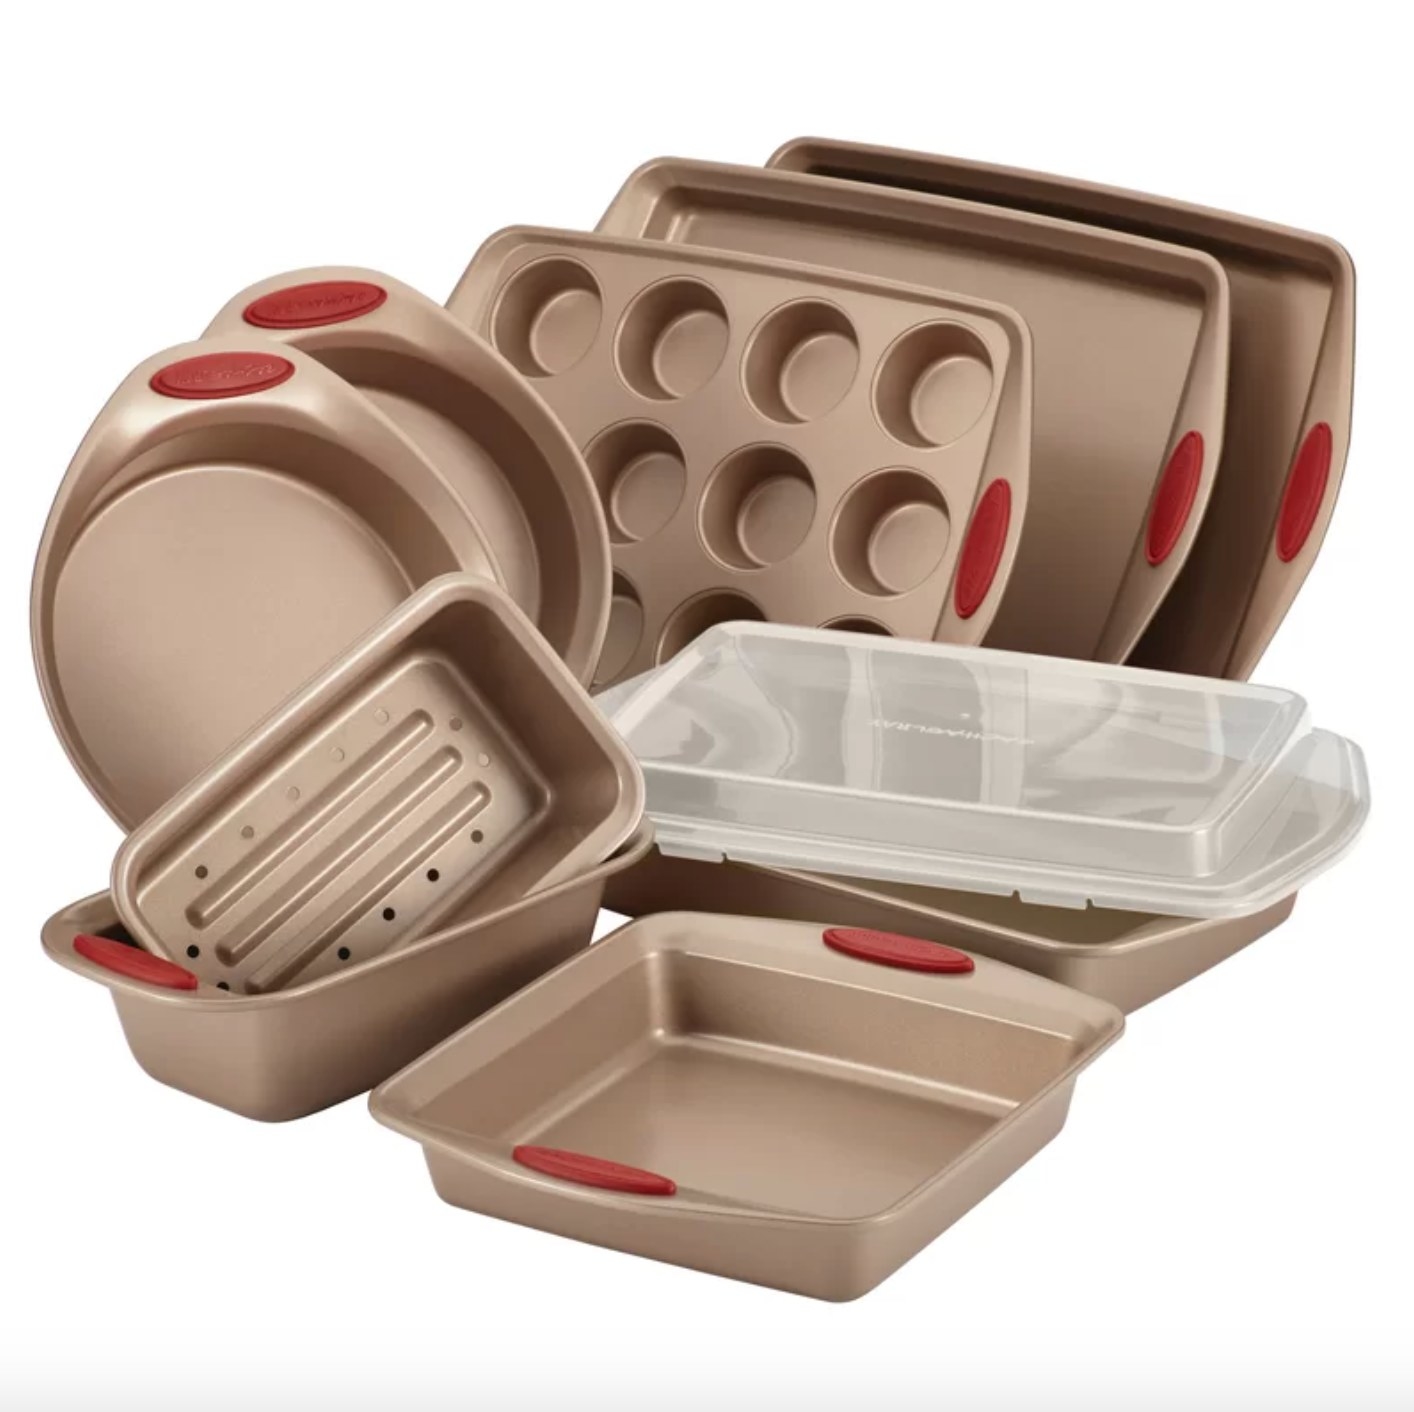 The Rachael Ray bakeware set in brass and red